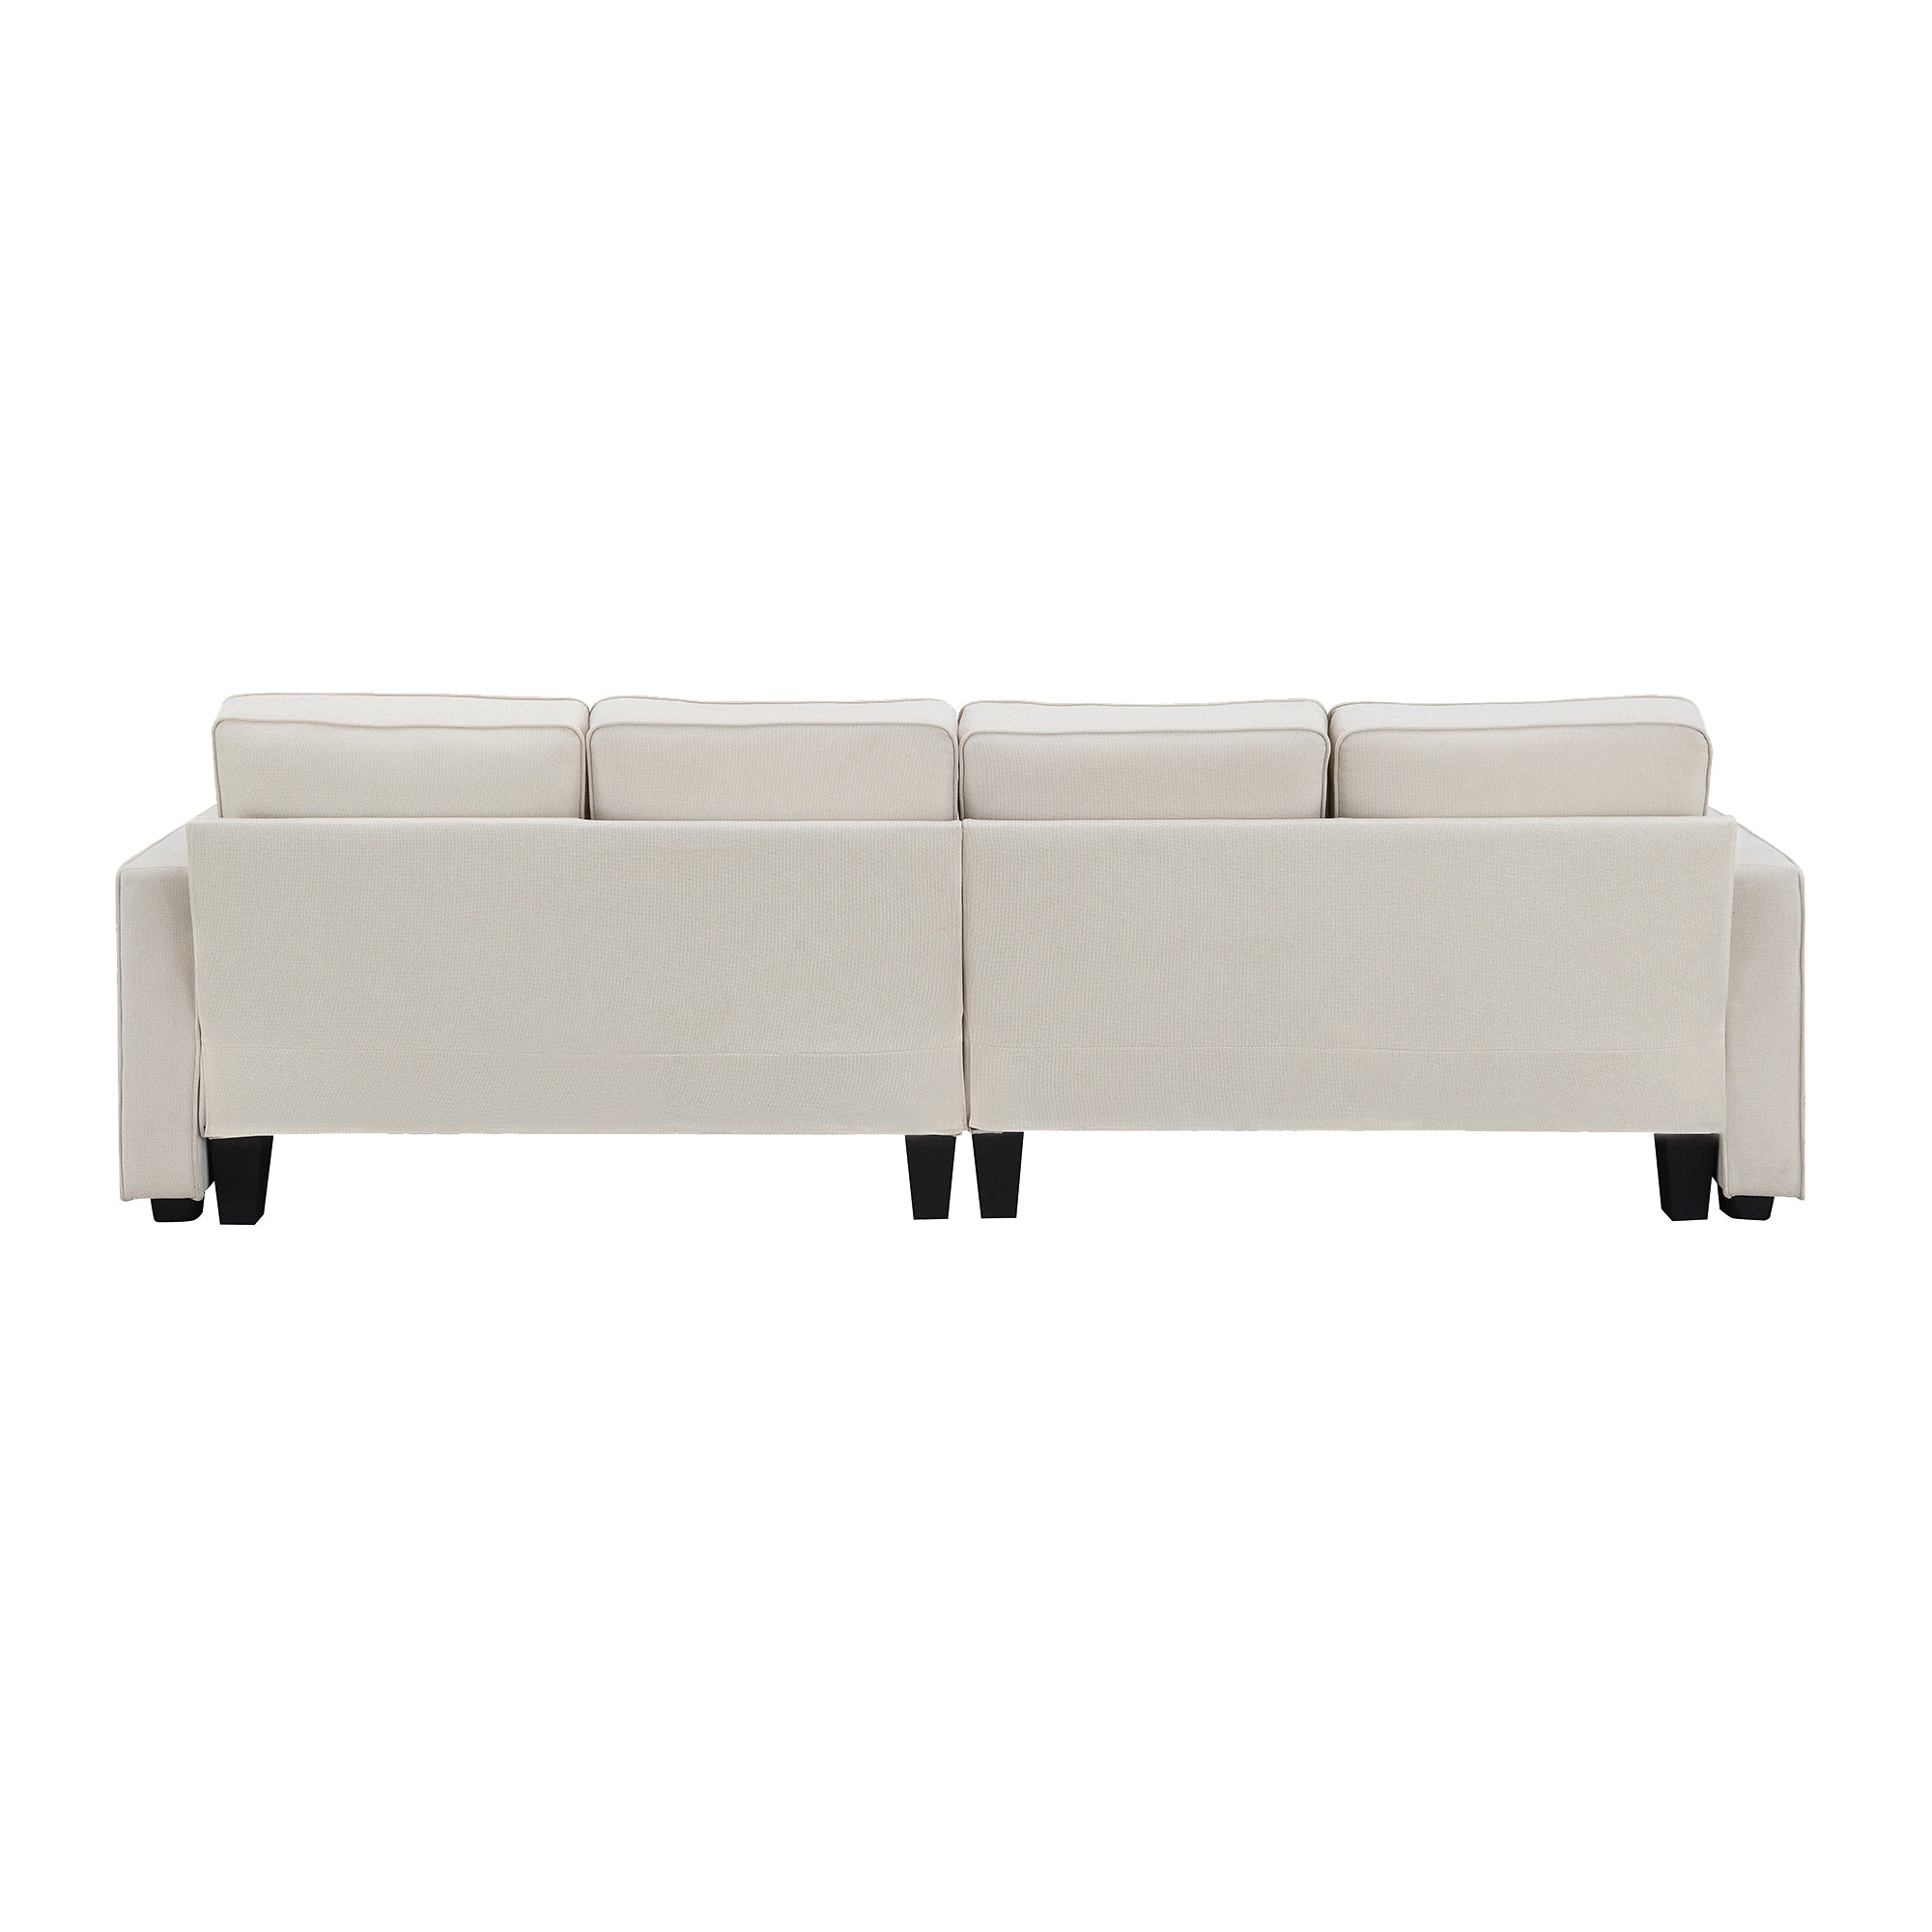 104" 4-Seater Modern Linen Fabric Sofa with Armrest Pockets and 4 Pillows,Minimalist Style Couch - Beige